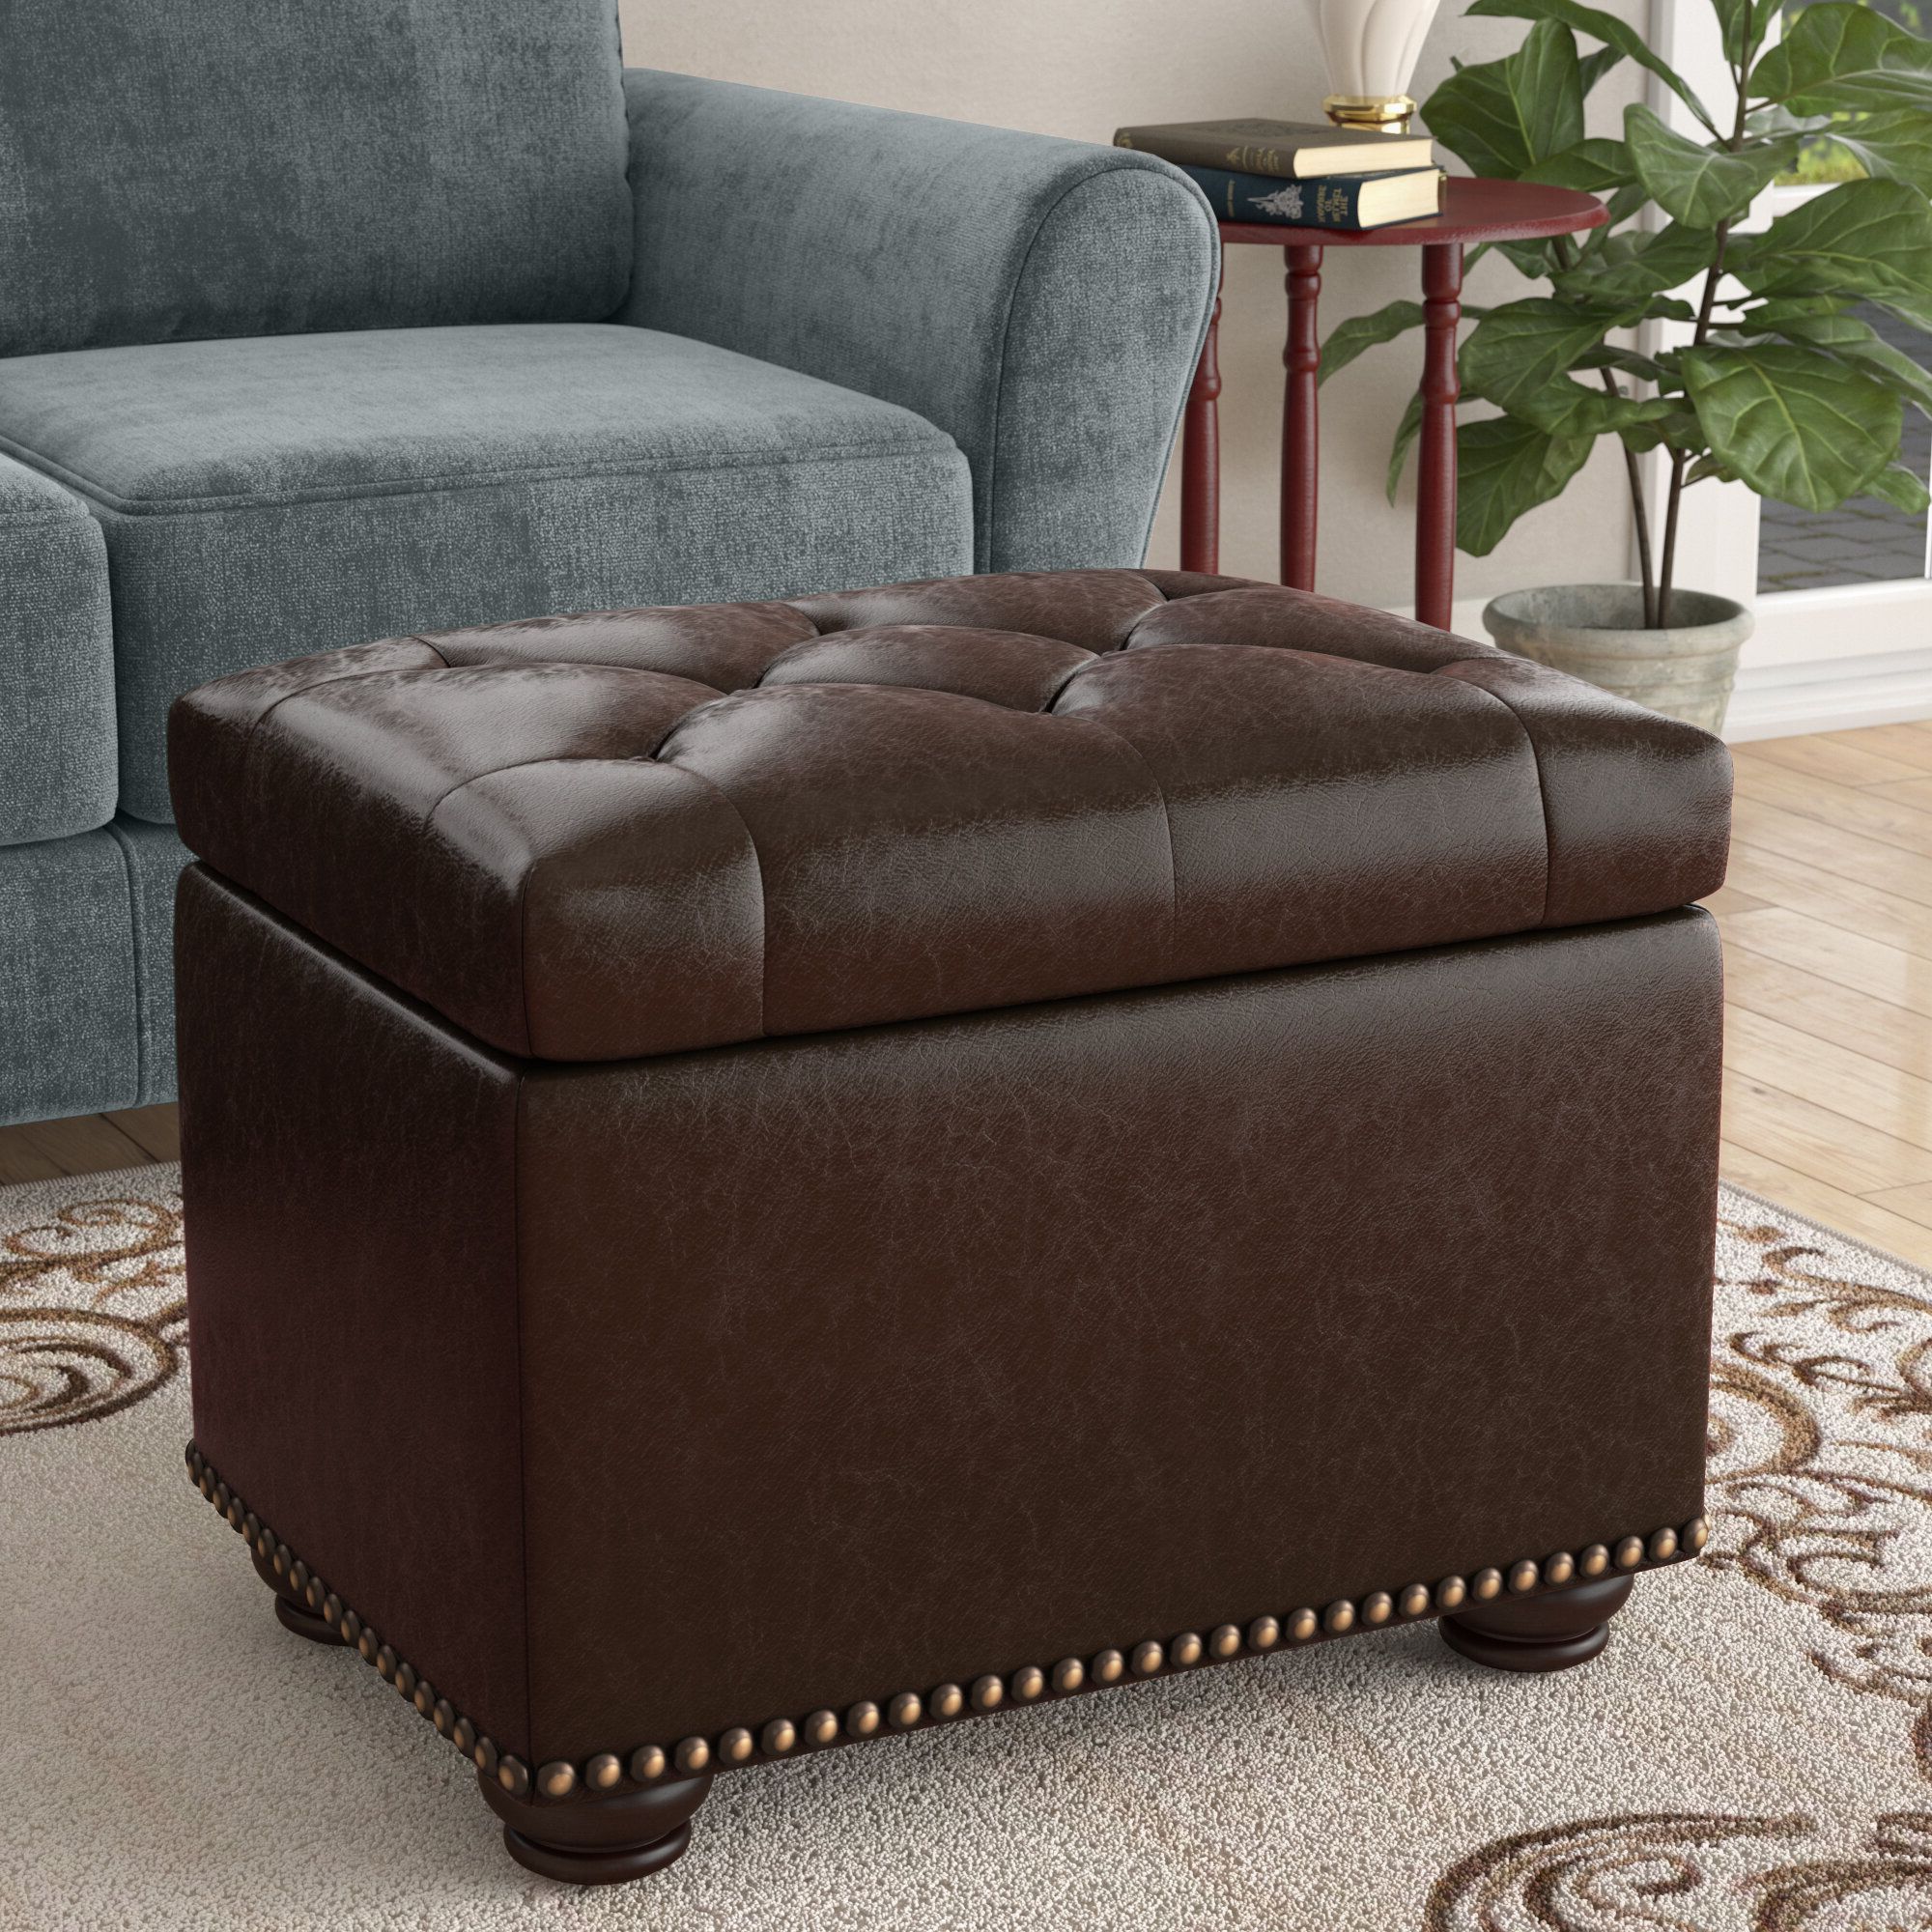 Boston Espresso Brown Tufted Leather Storage Ottoman Coffee Table Inside Well Known Black And White Zigzag Pouf Ottomans (View 7 of 10)